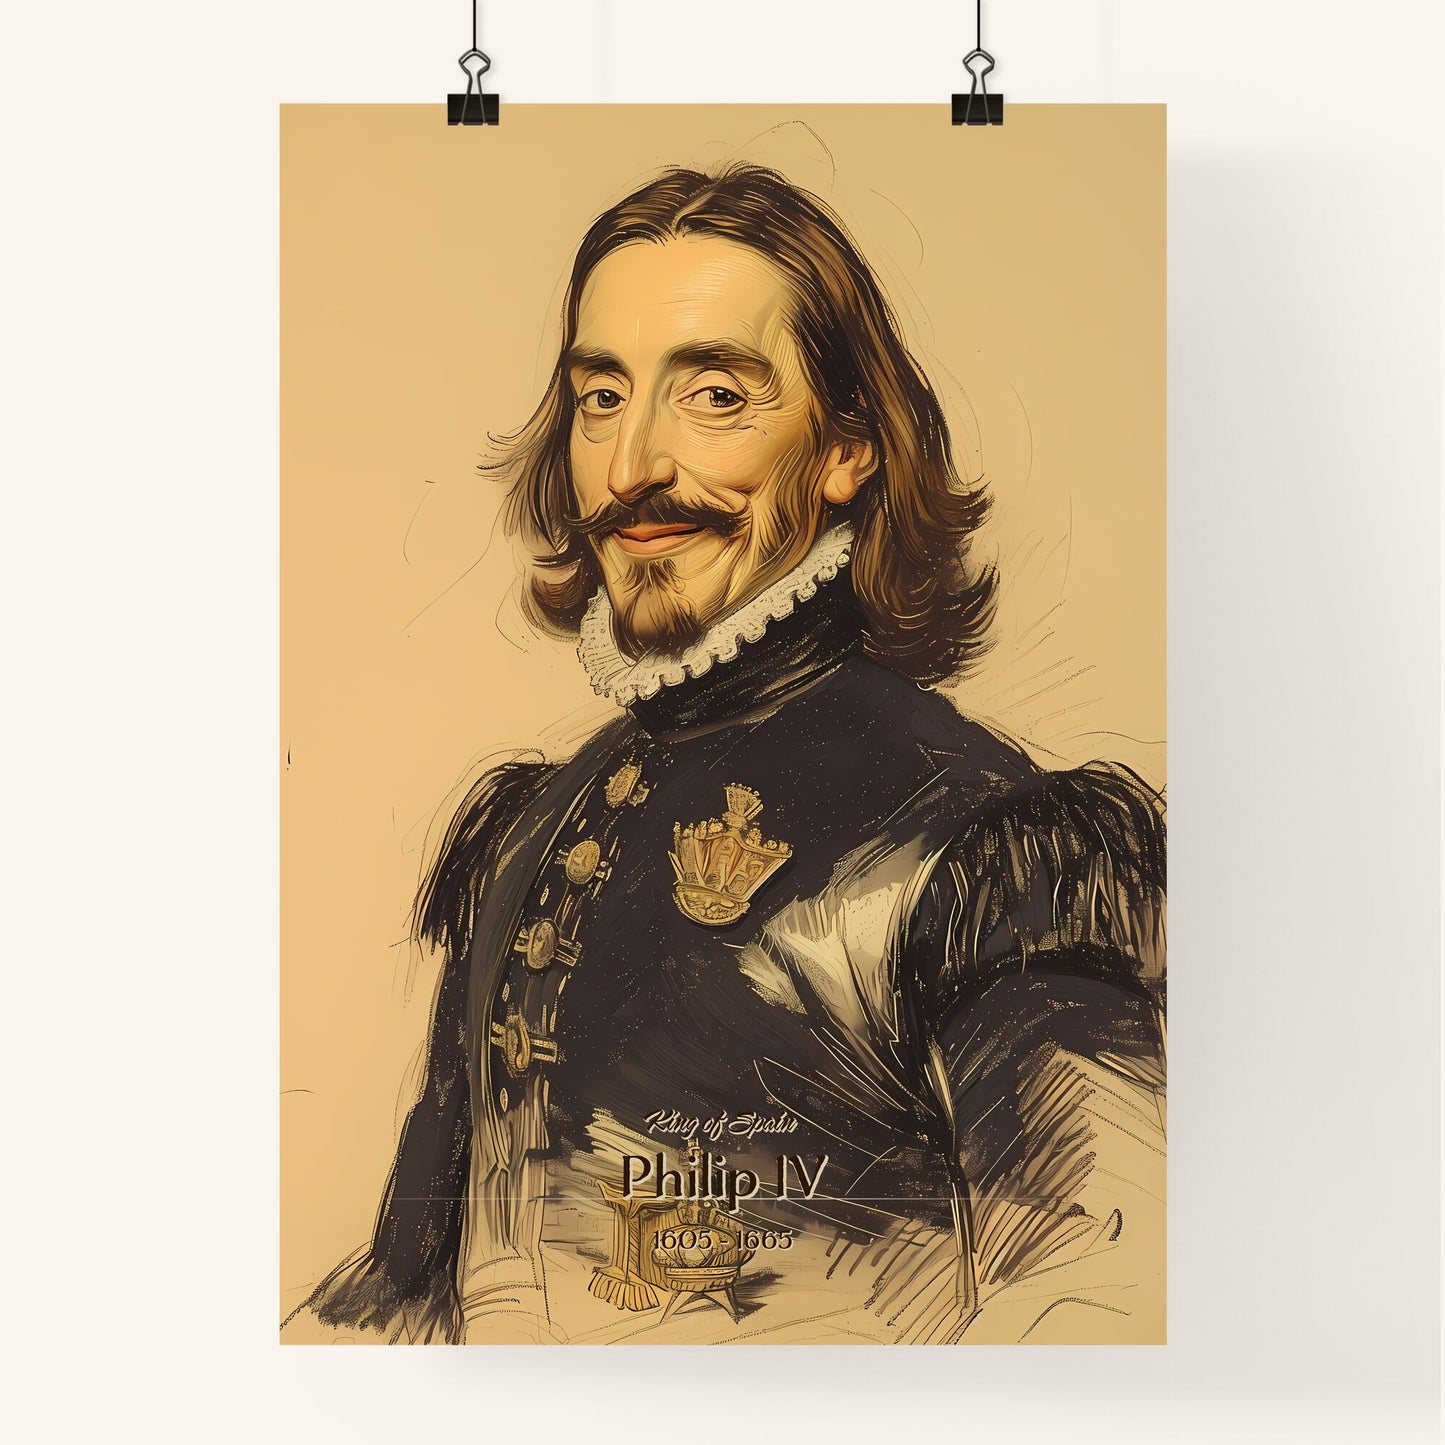 King of Spain, Philip IV, 1605 - 1665, A Poster of a man in a black suit Default Title